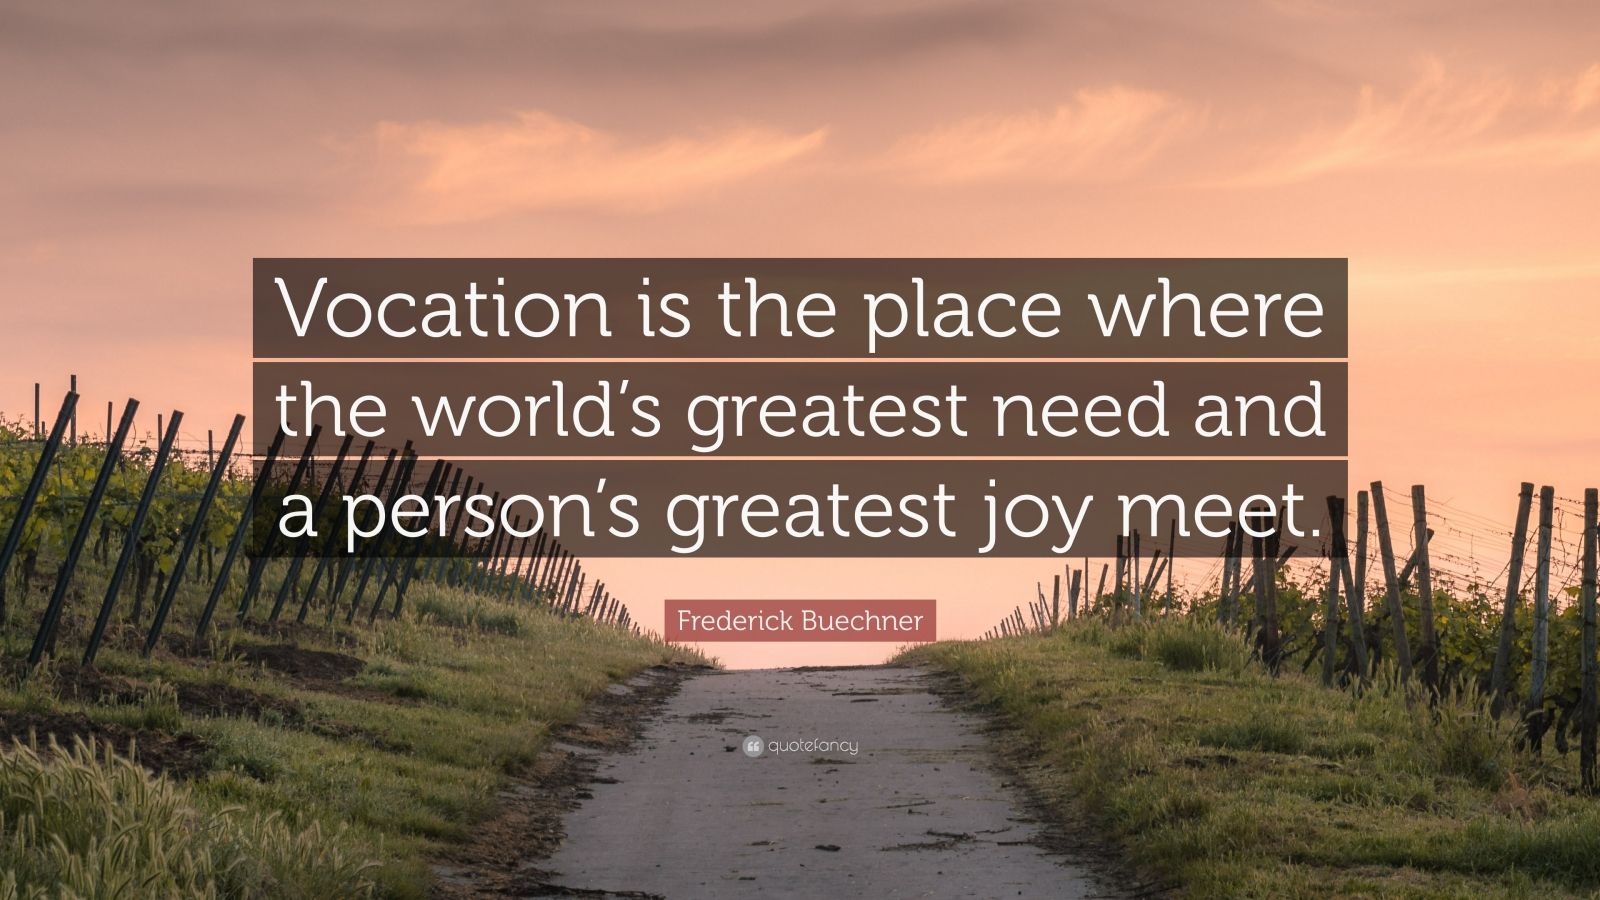 Frederick Buechner Quote: “Vocation is the place where the world’s